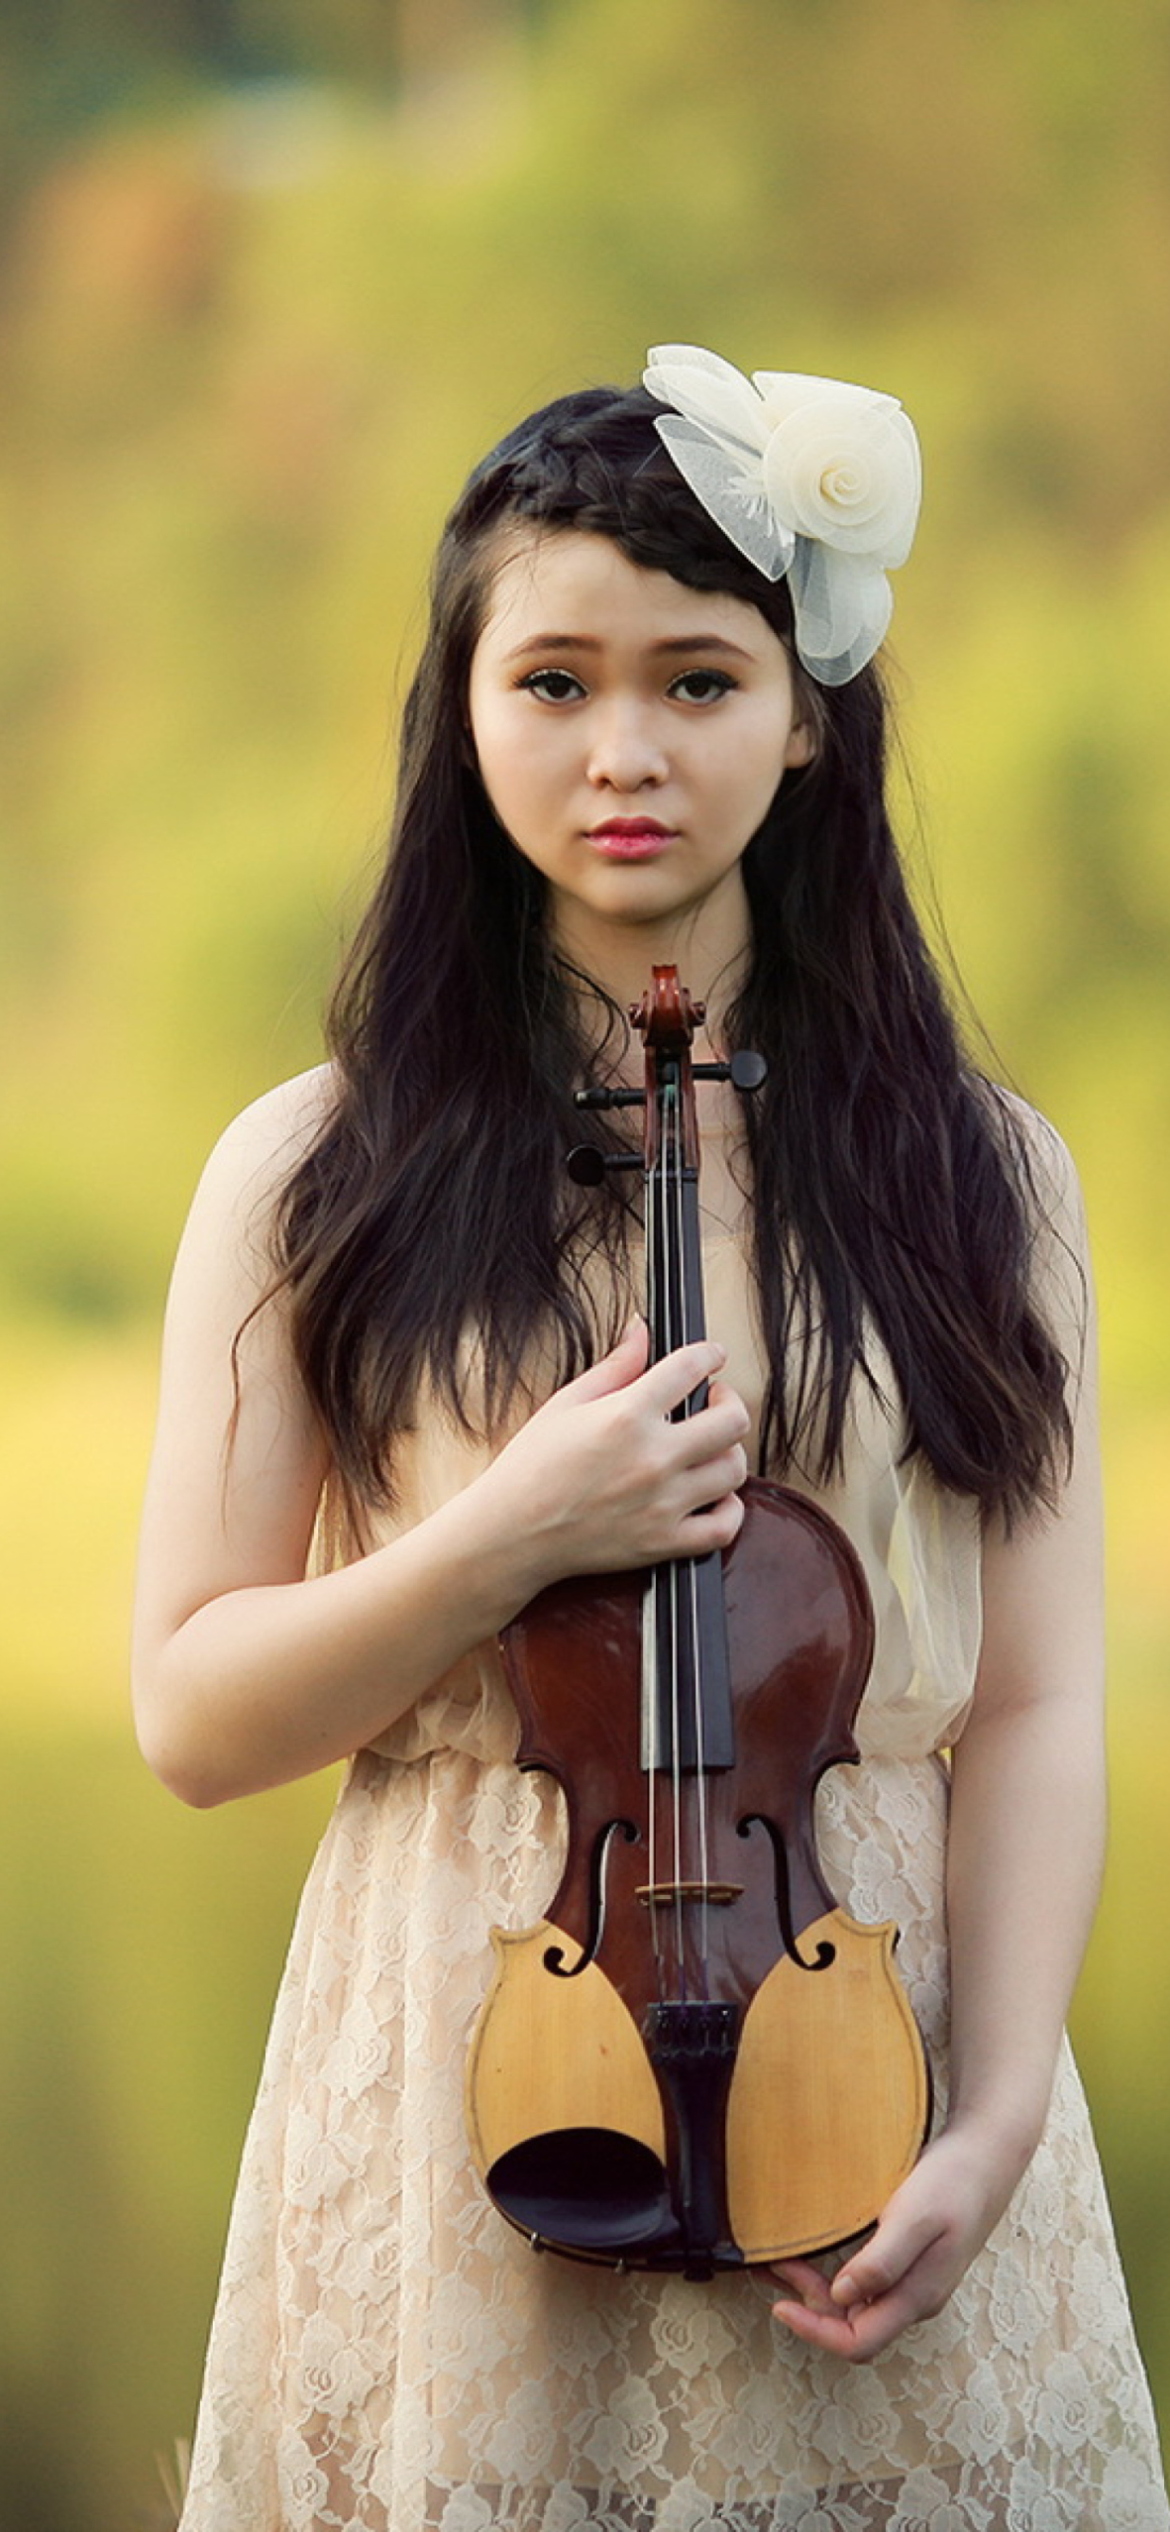 Girl With Violin wallpaper 1170x2532